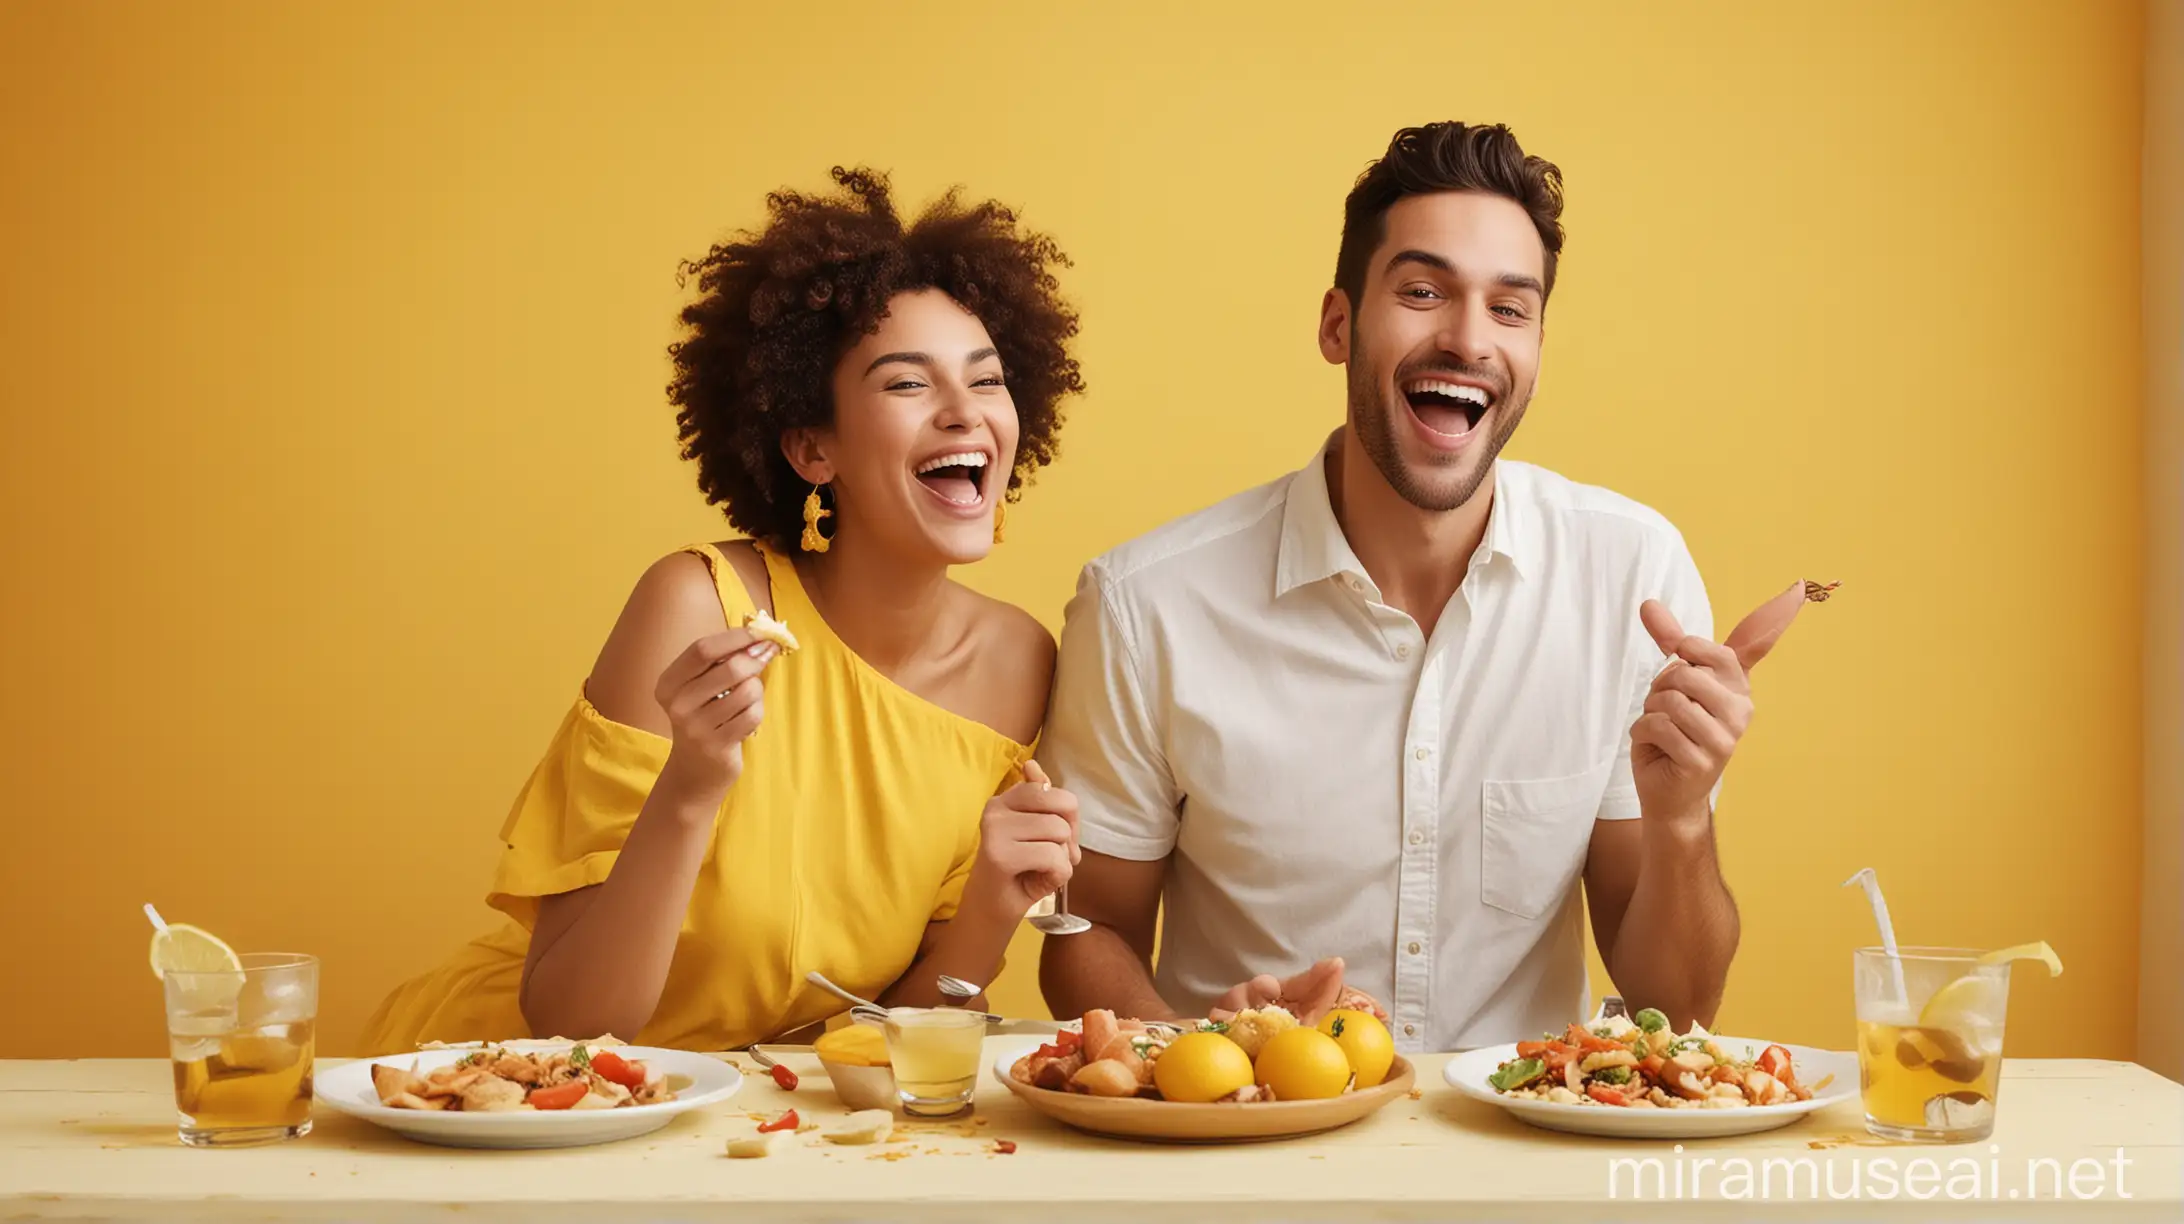 Happy Couple Enjoying Food in a Bright Yellow Room